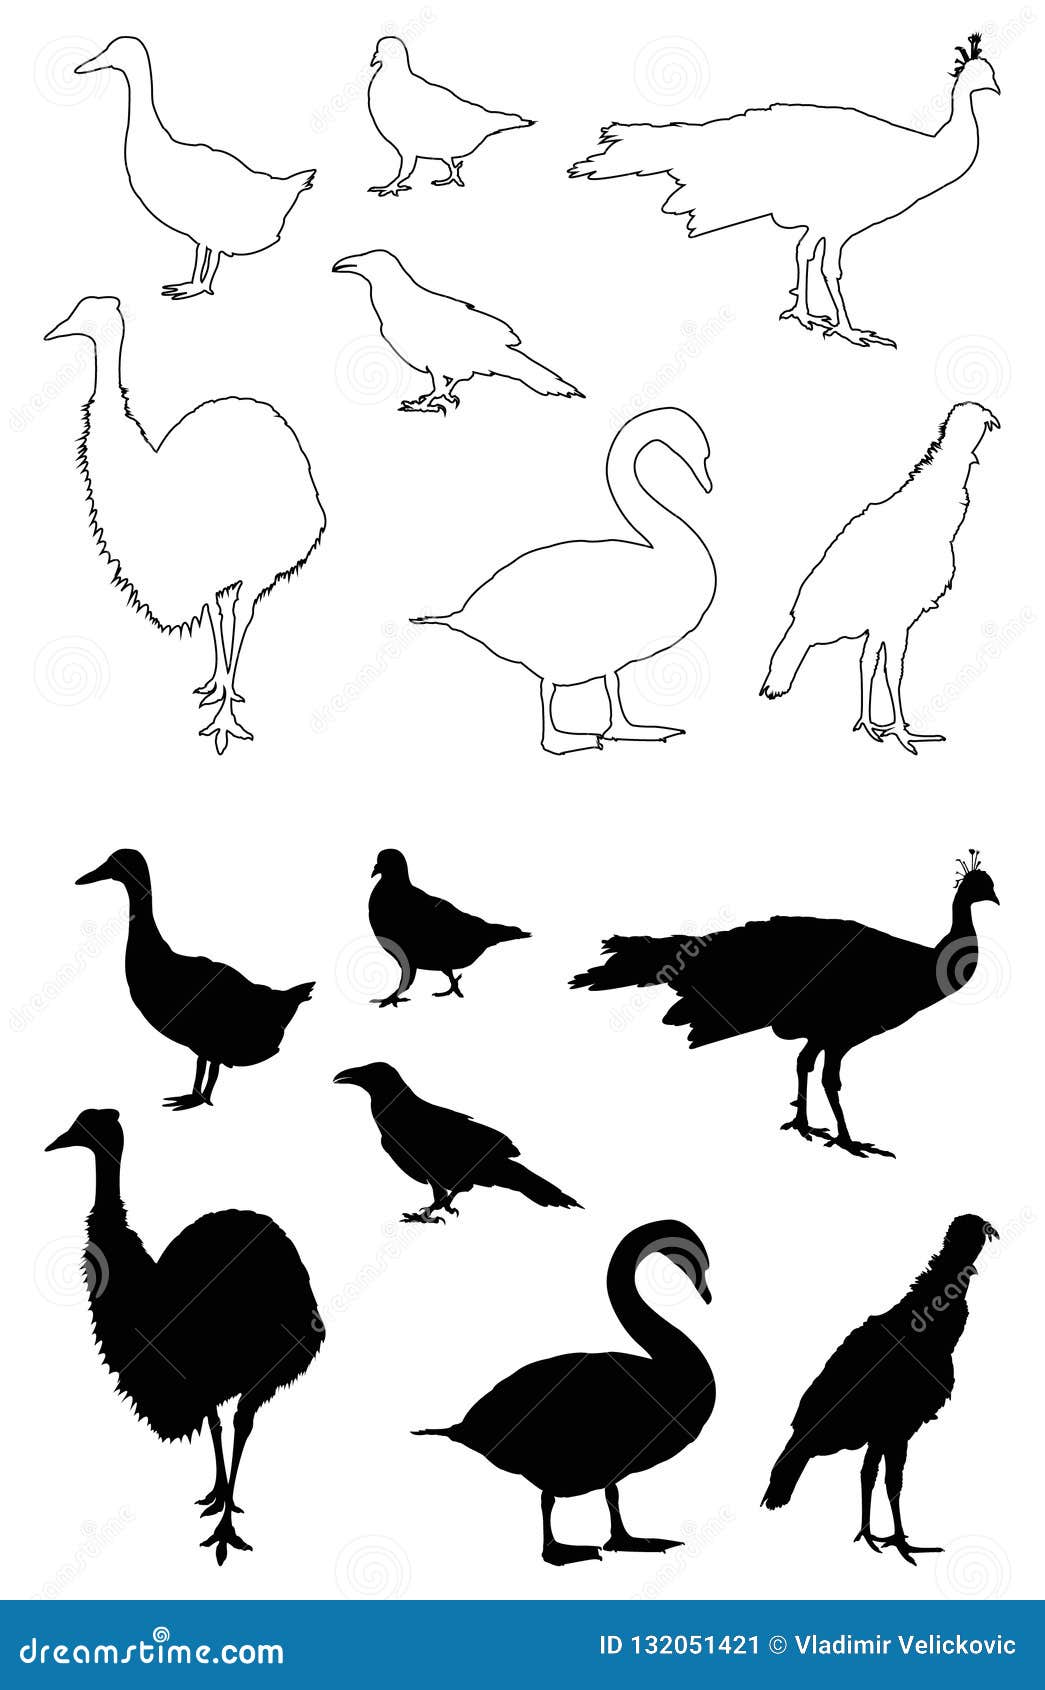 various birds silhouette - group of endothermic vertebrates, characterised by feathers, toothless beaked jaws, the laying of hard-